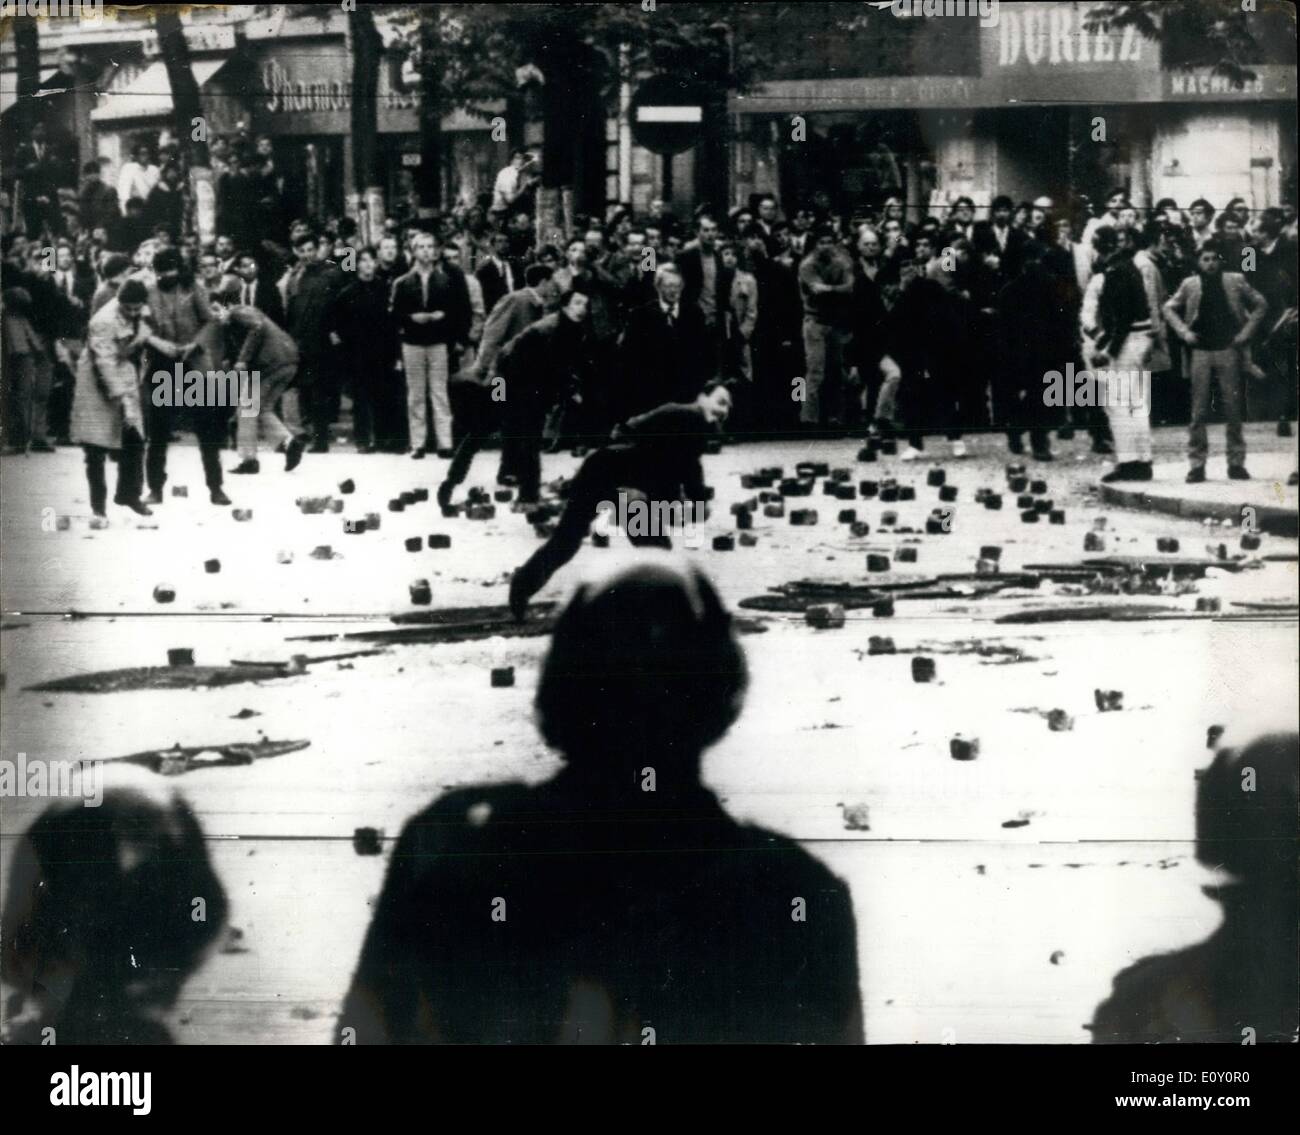 May 05, 1968 - Rioting Student Clash with Police in Paris Tear gas and hoses were used during yesterday's clash with French students and French riot Police during a demonstration in the University area of Paris. The students were protesting against conditions at the Sorbonne and against the closure last week of the Faculty of Letters in Manterre. Photo Shows: Some of the student demonstrators are seen stoning the police during yesterday's disturbance. Stock Photo